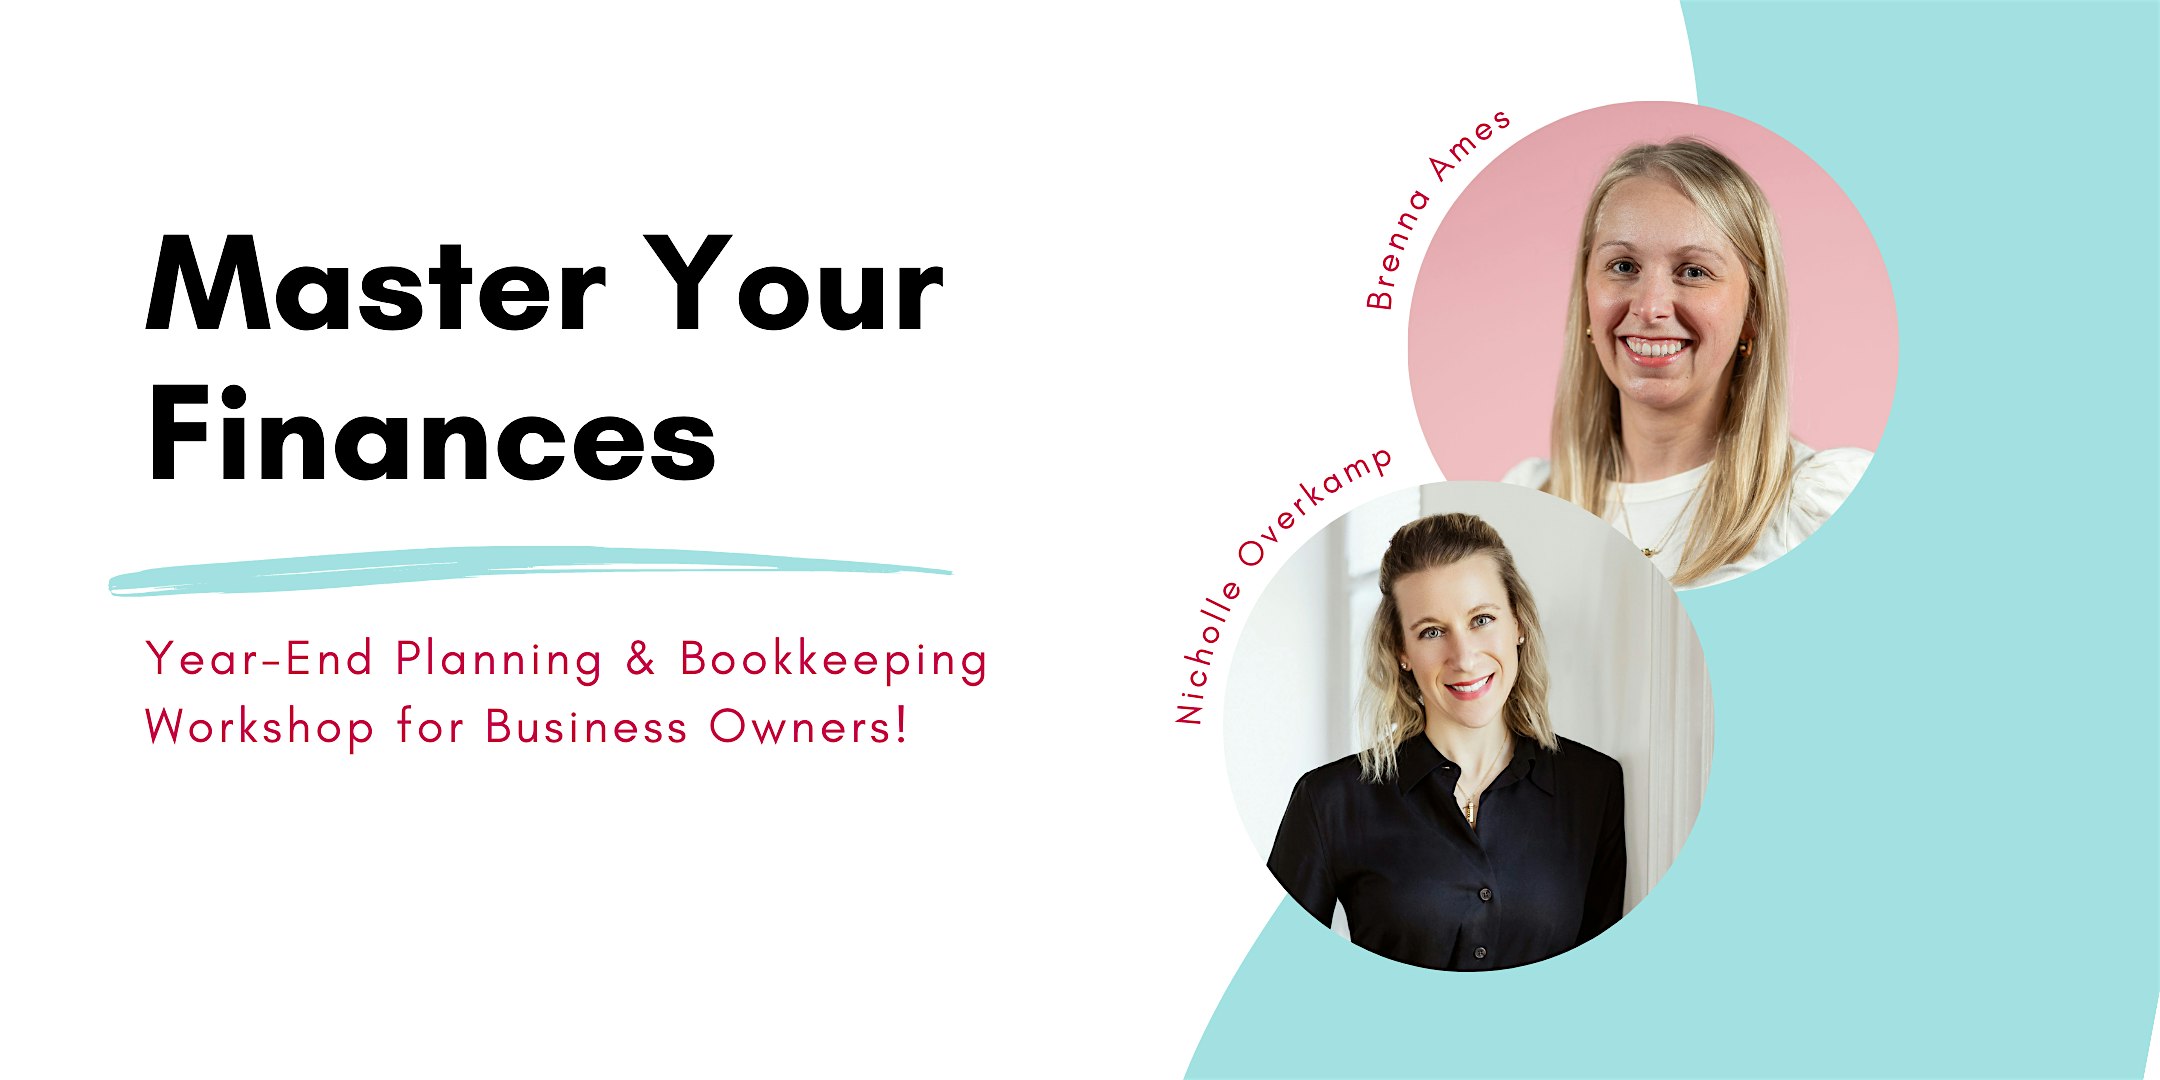 Master Your Finances: Year-End Planning & Bookkeeping Workshop for Business Owners